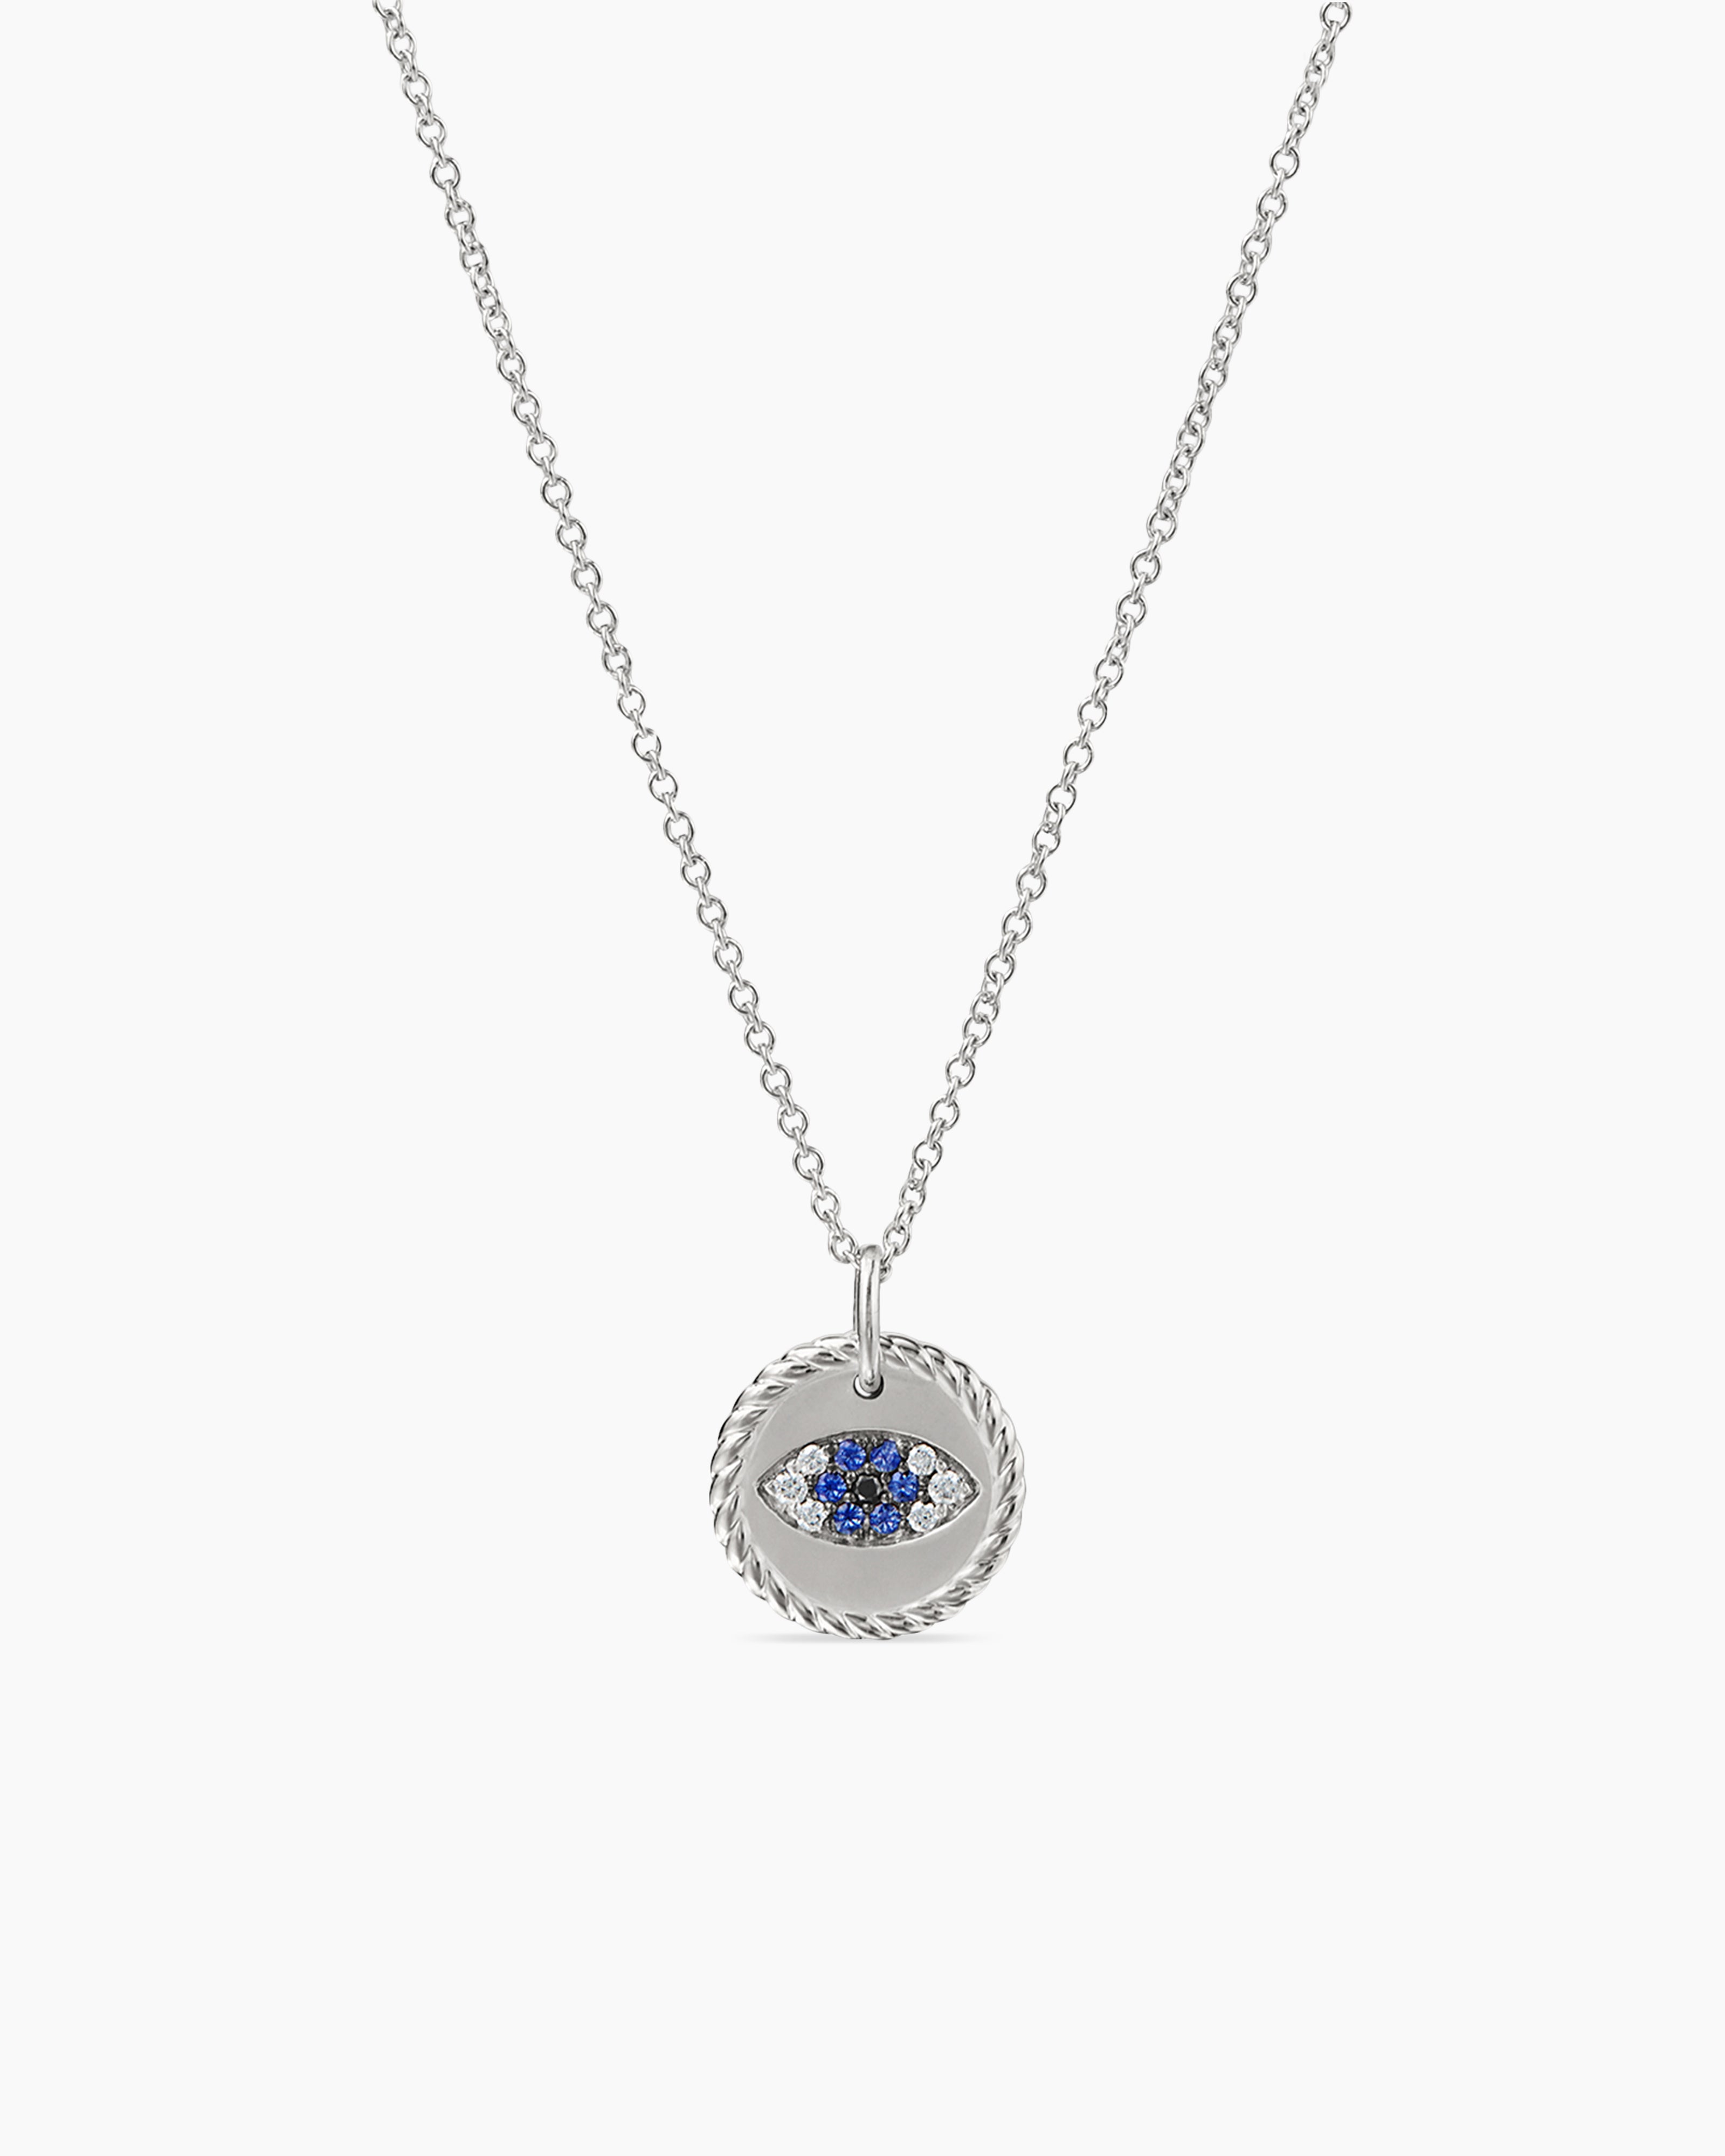 Genuine Evil Eye Jewelry - Explore The Meaning of Evil Eye | Onecklace